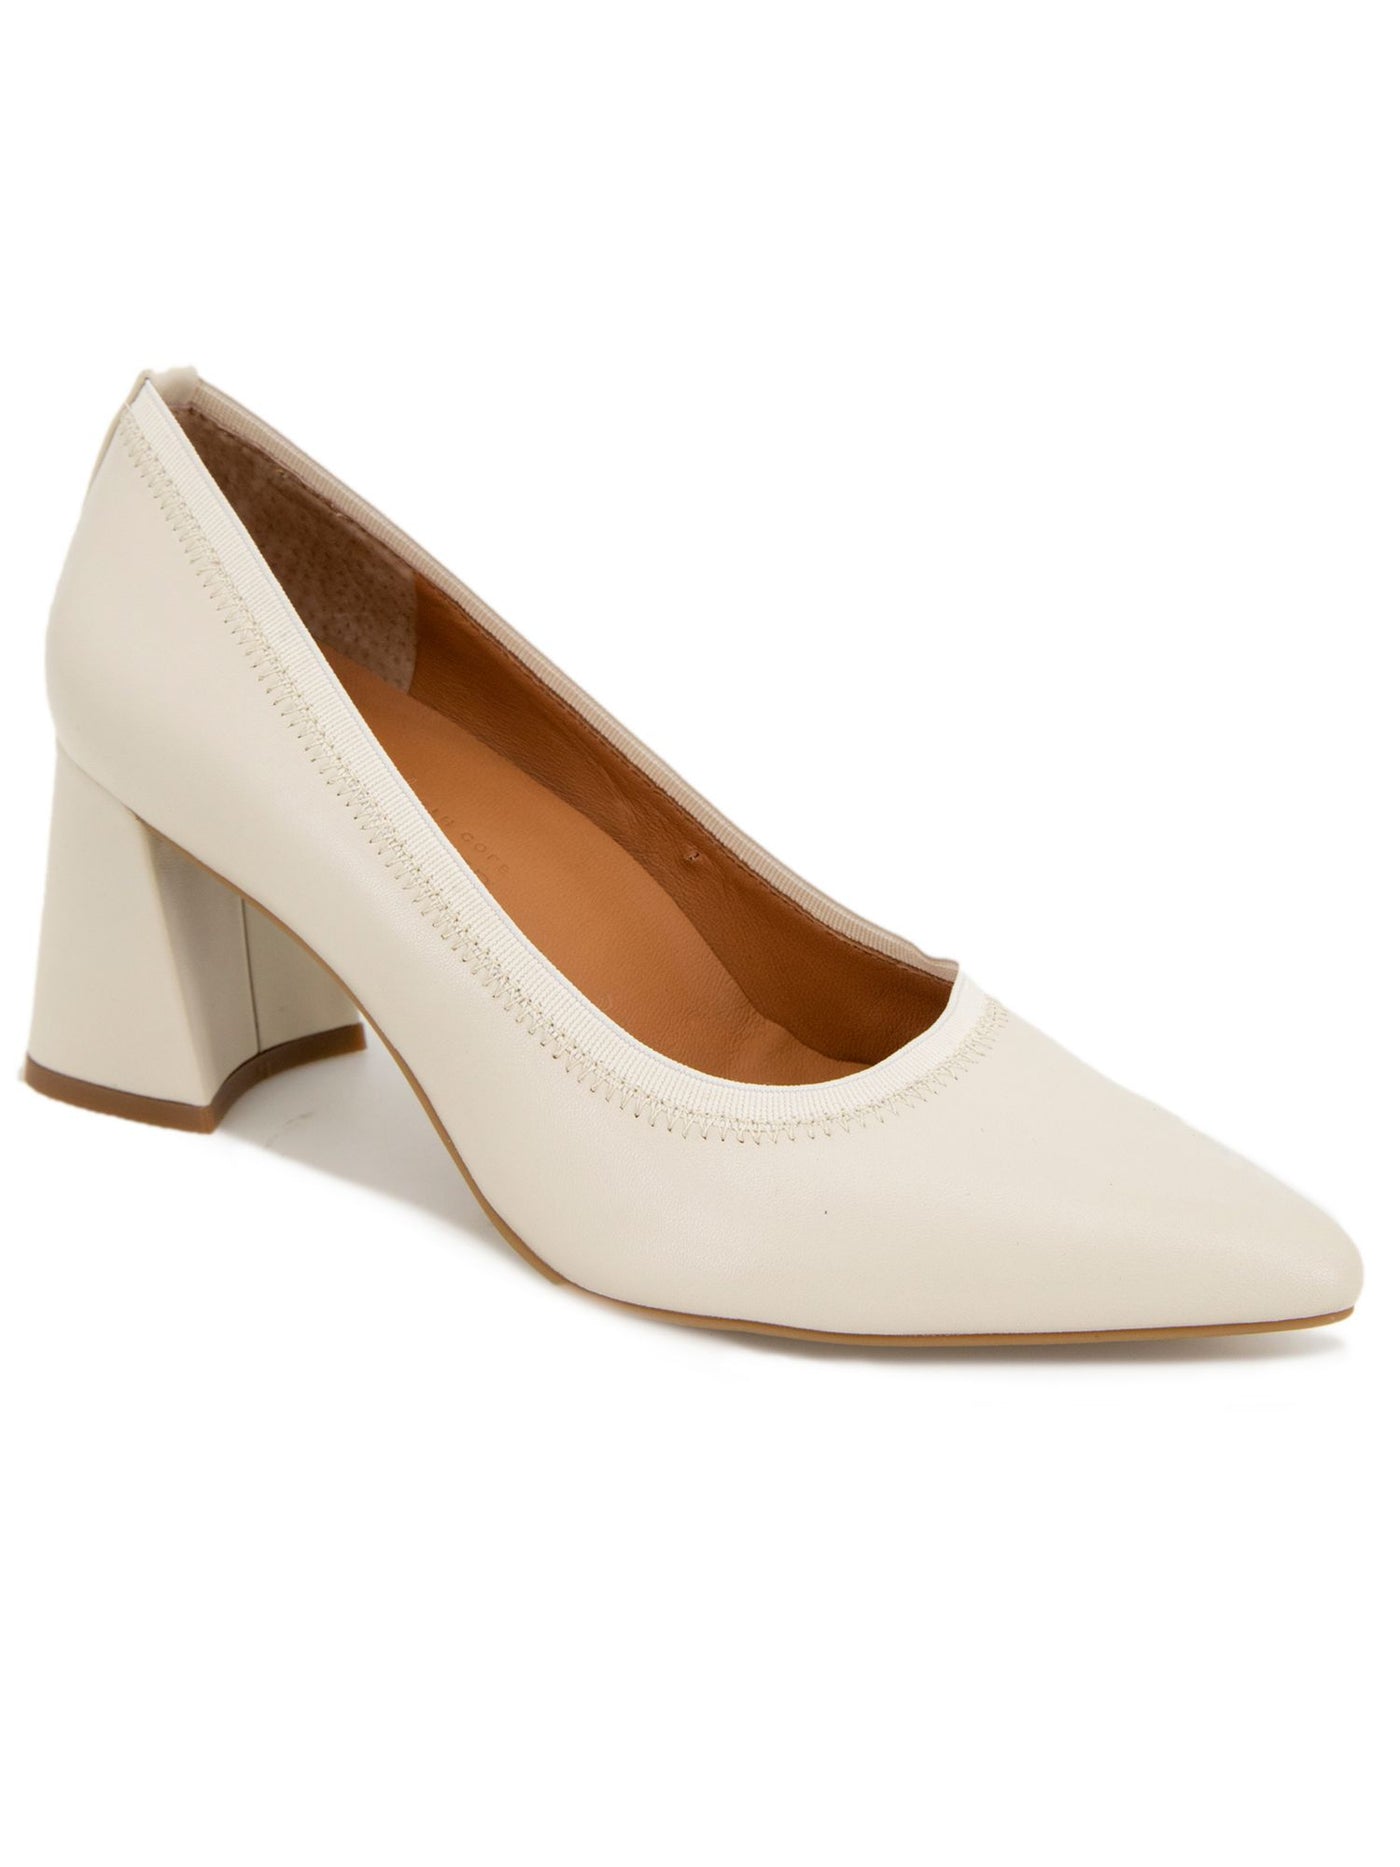 GENTLE SOULS KENNETH COLE Womens Beige Cushioned Dionne Pointed Toe Flare Slip On Pumps Shoes 7 M